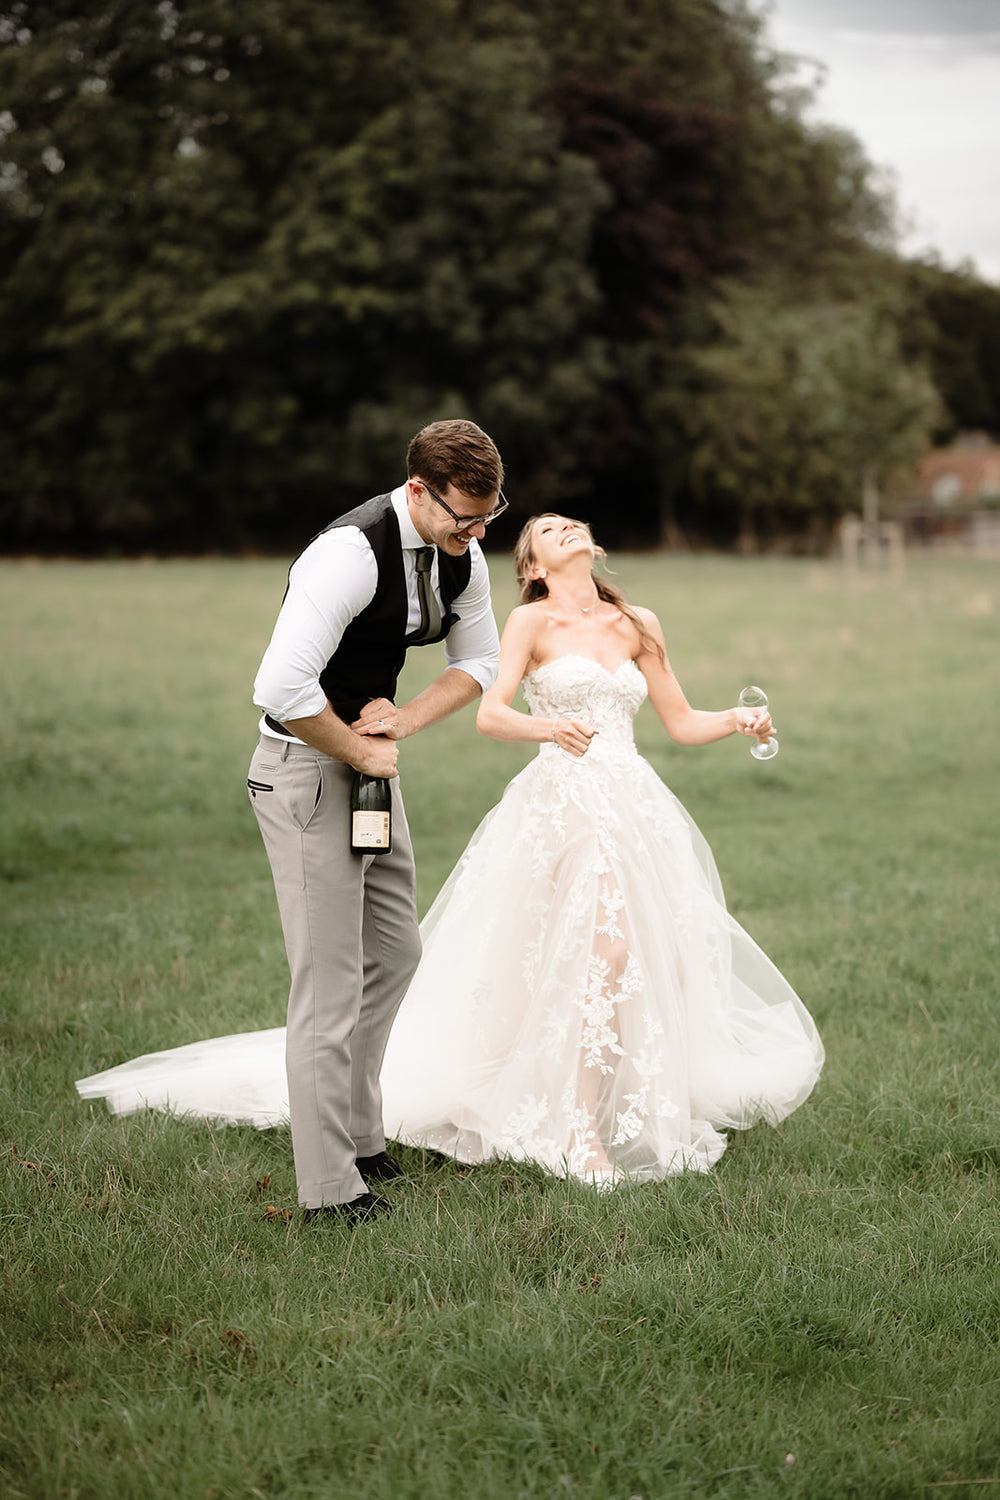 Image of a married couple on their wedding day, wedding wine deals, wedding fizz